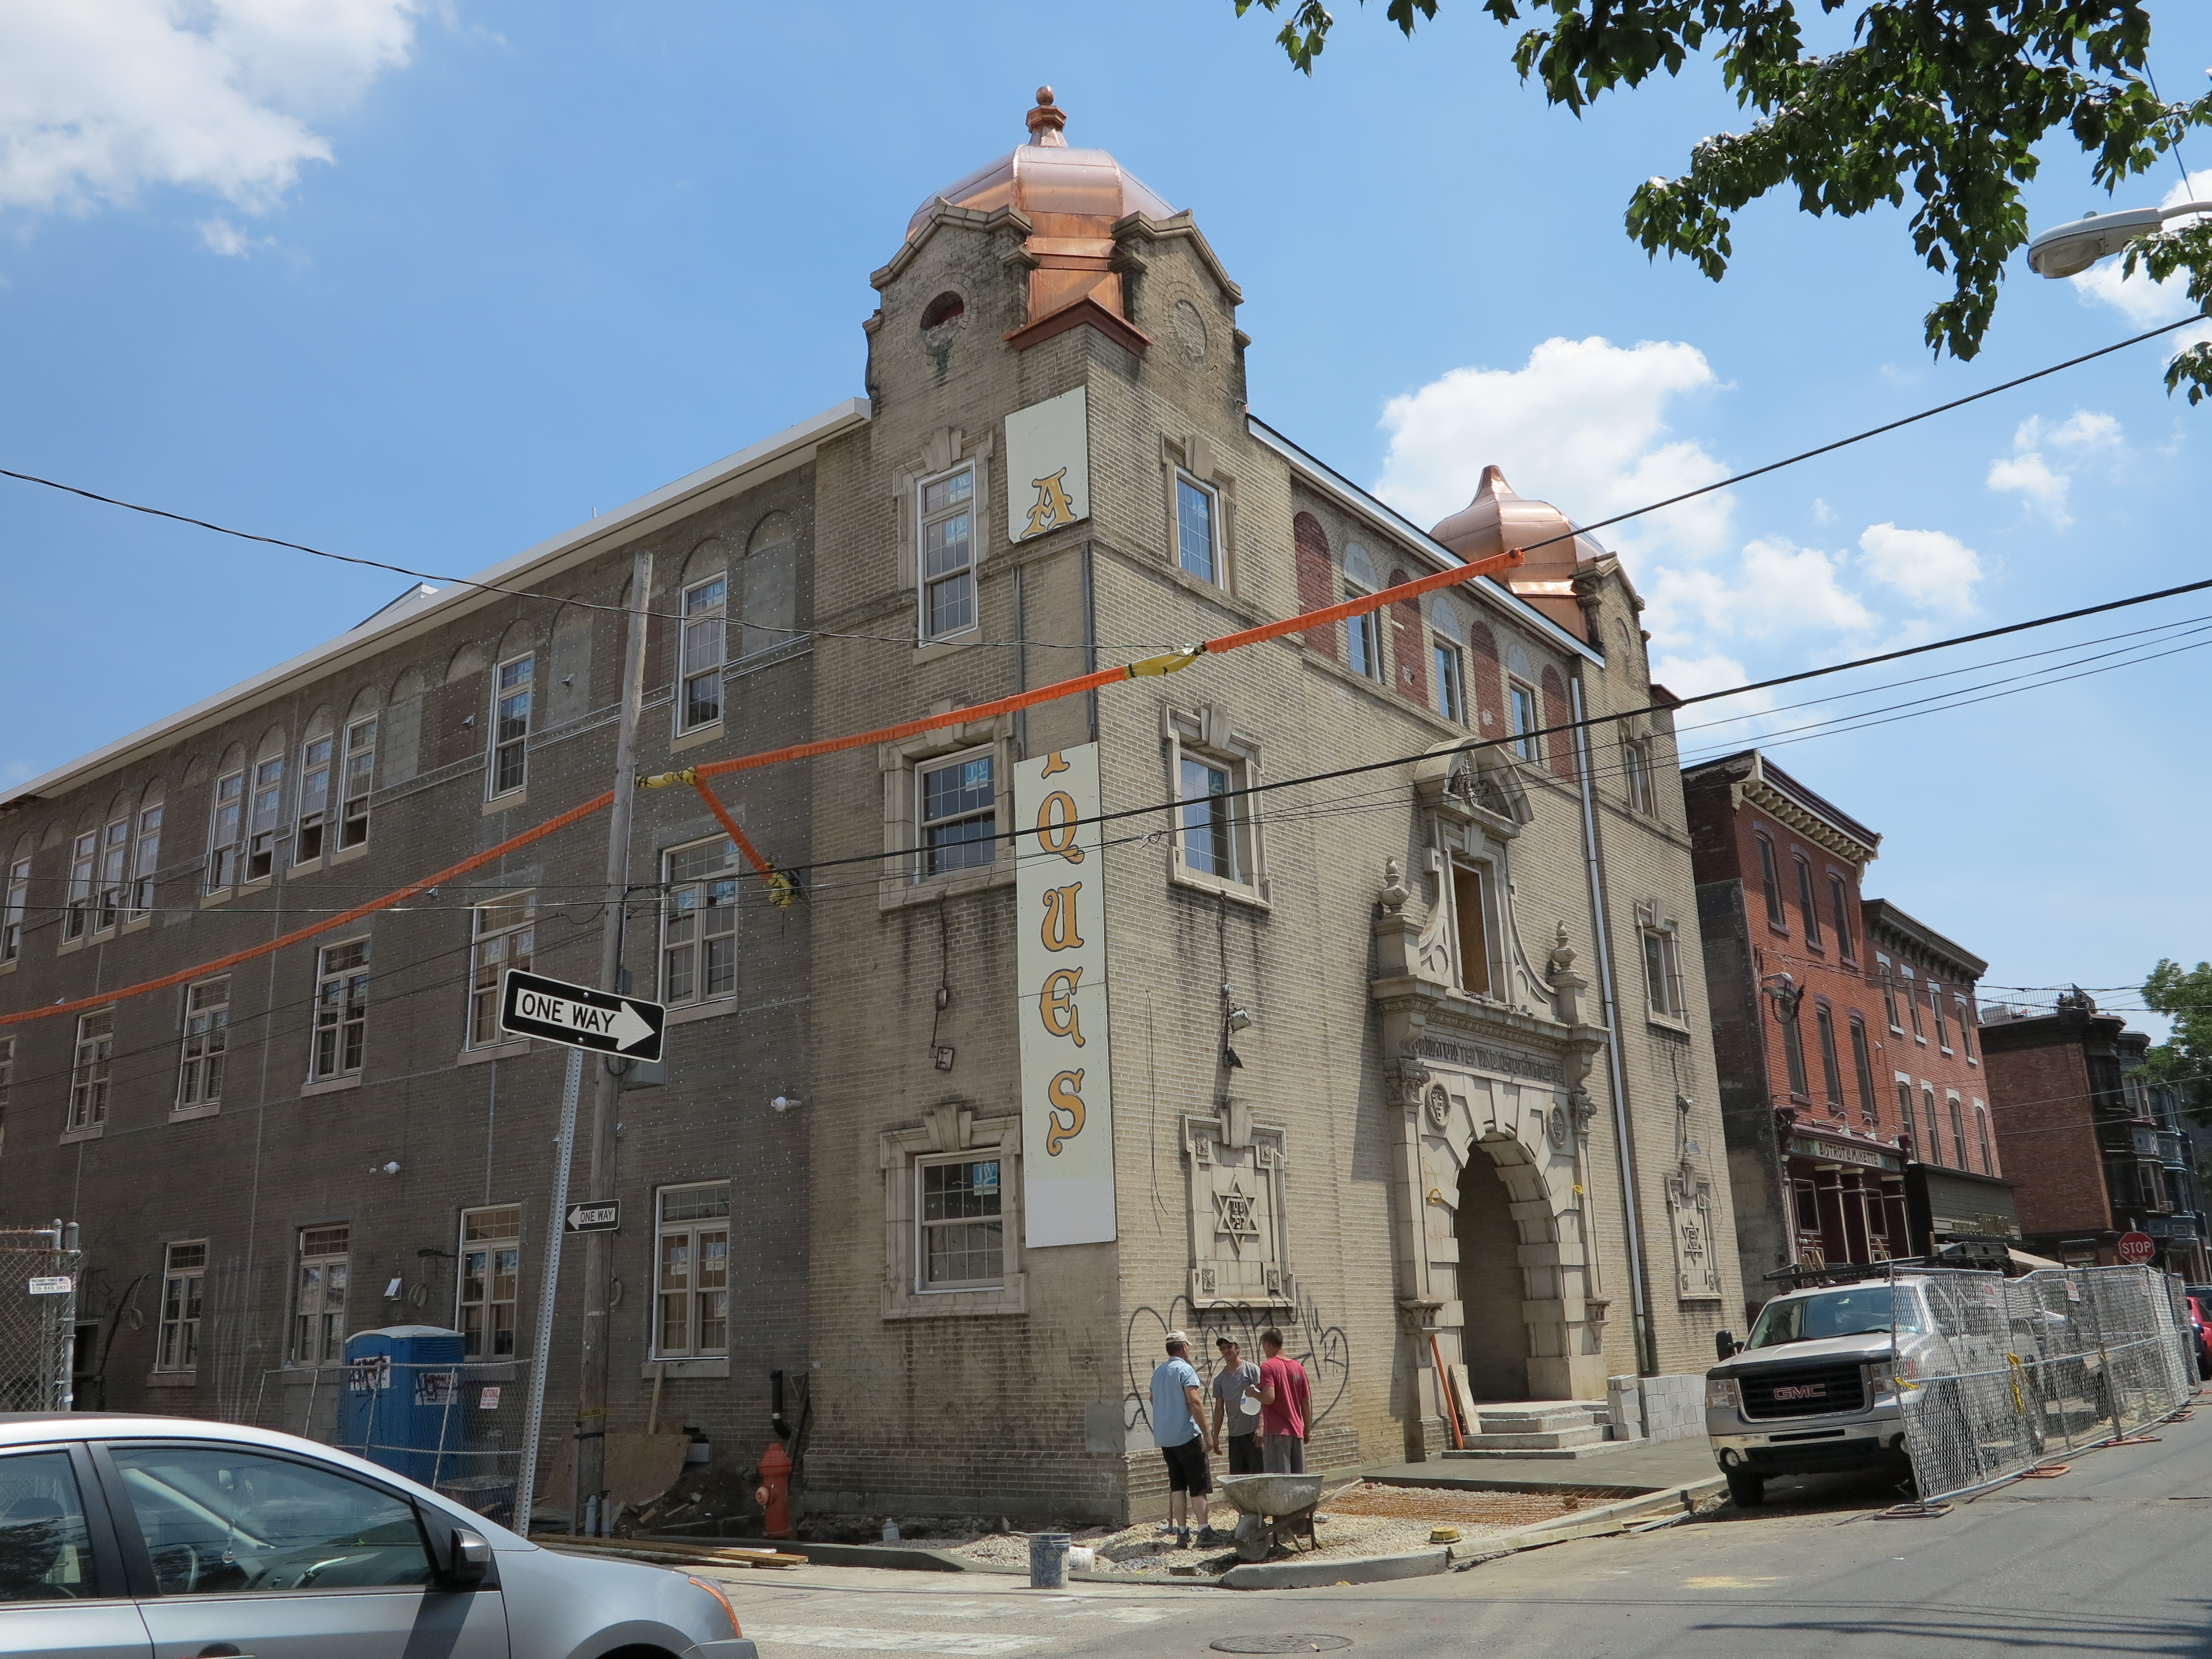 New domes on historic synagogue being converted to residential on South 6th Street, June 2014